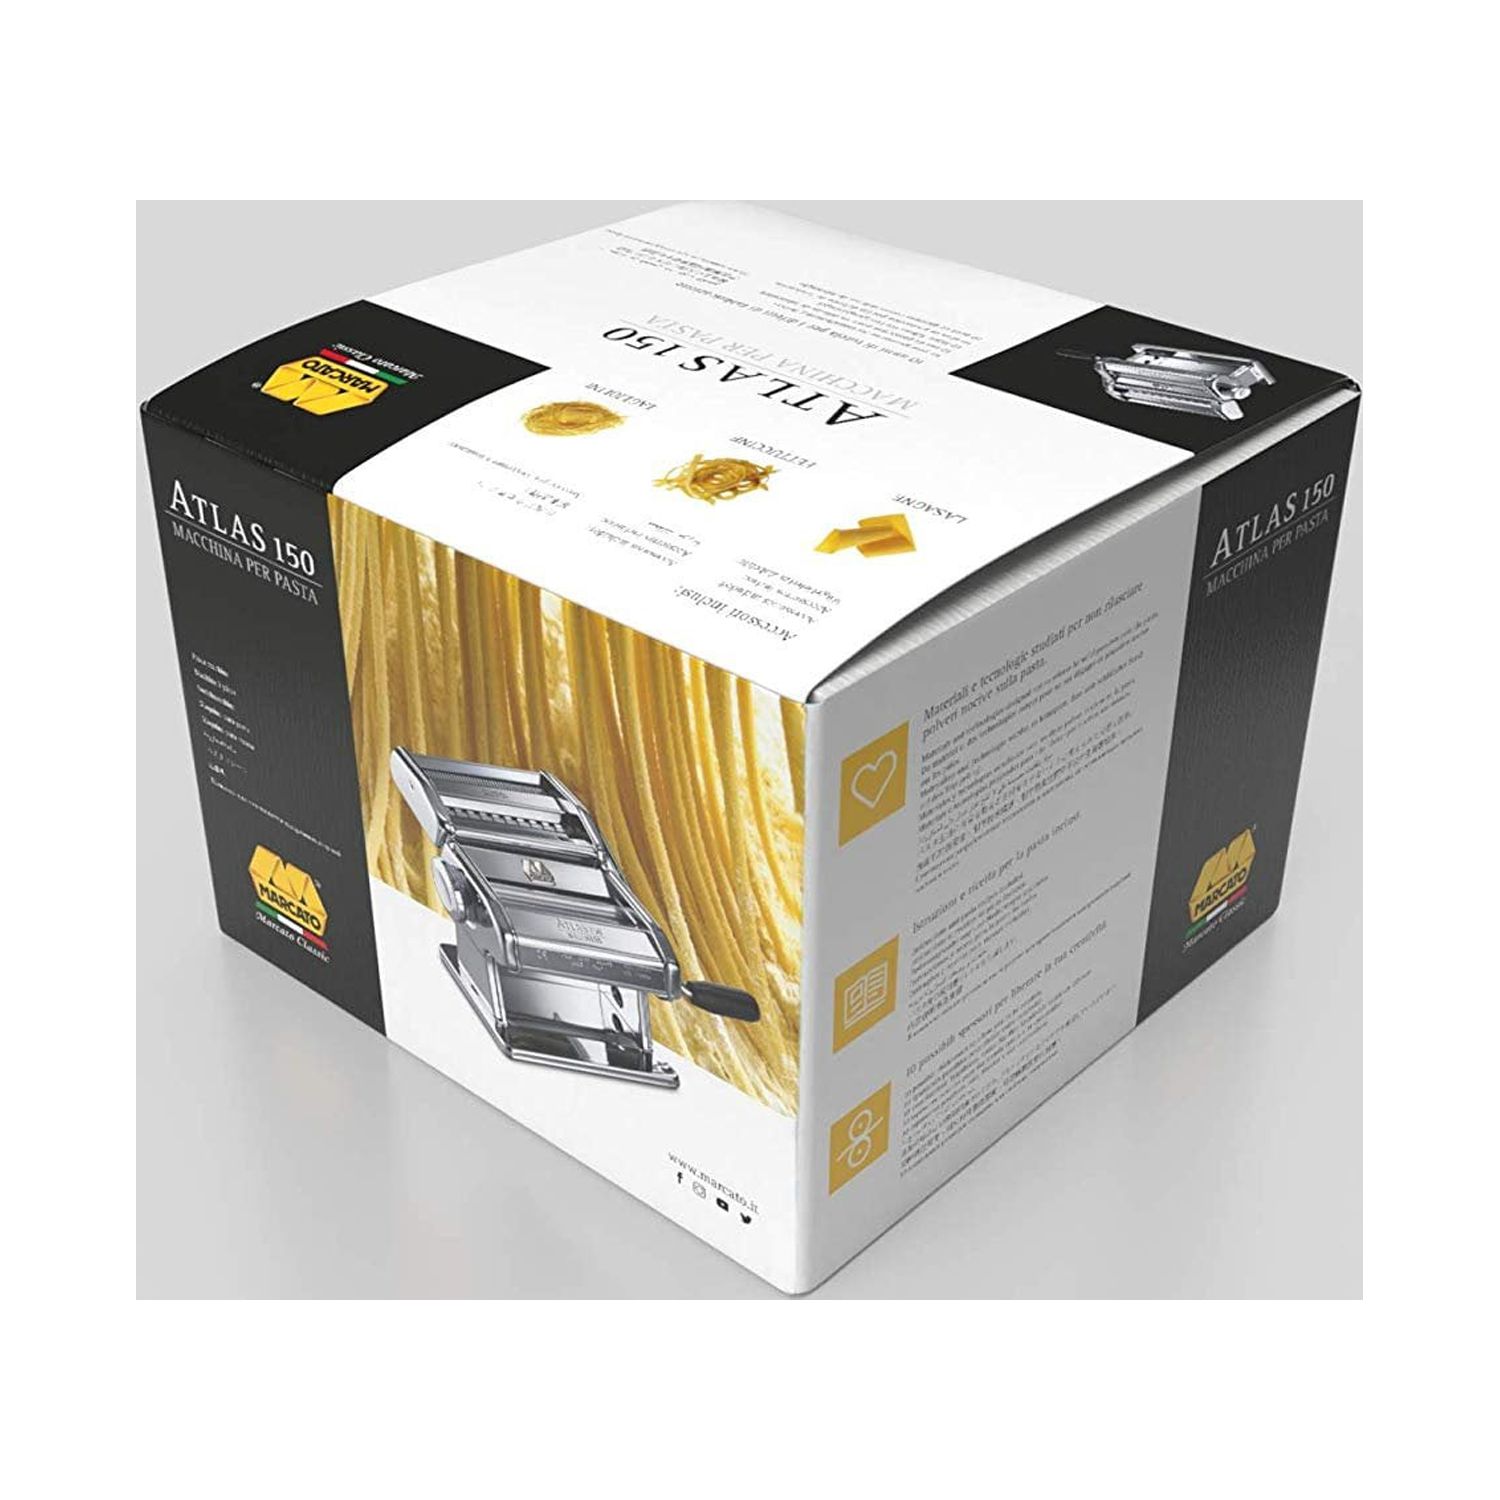 Atlas Marcato Made in Italy Stainless Silver Black 150mm Wide Pasta Machine 8320 - image 2 of 13